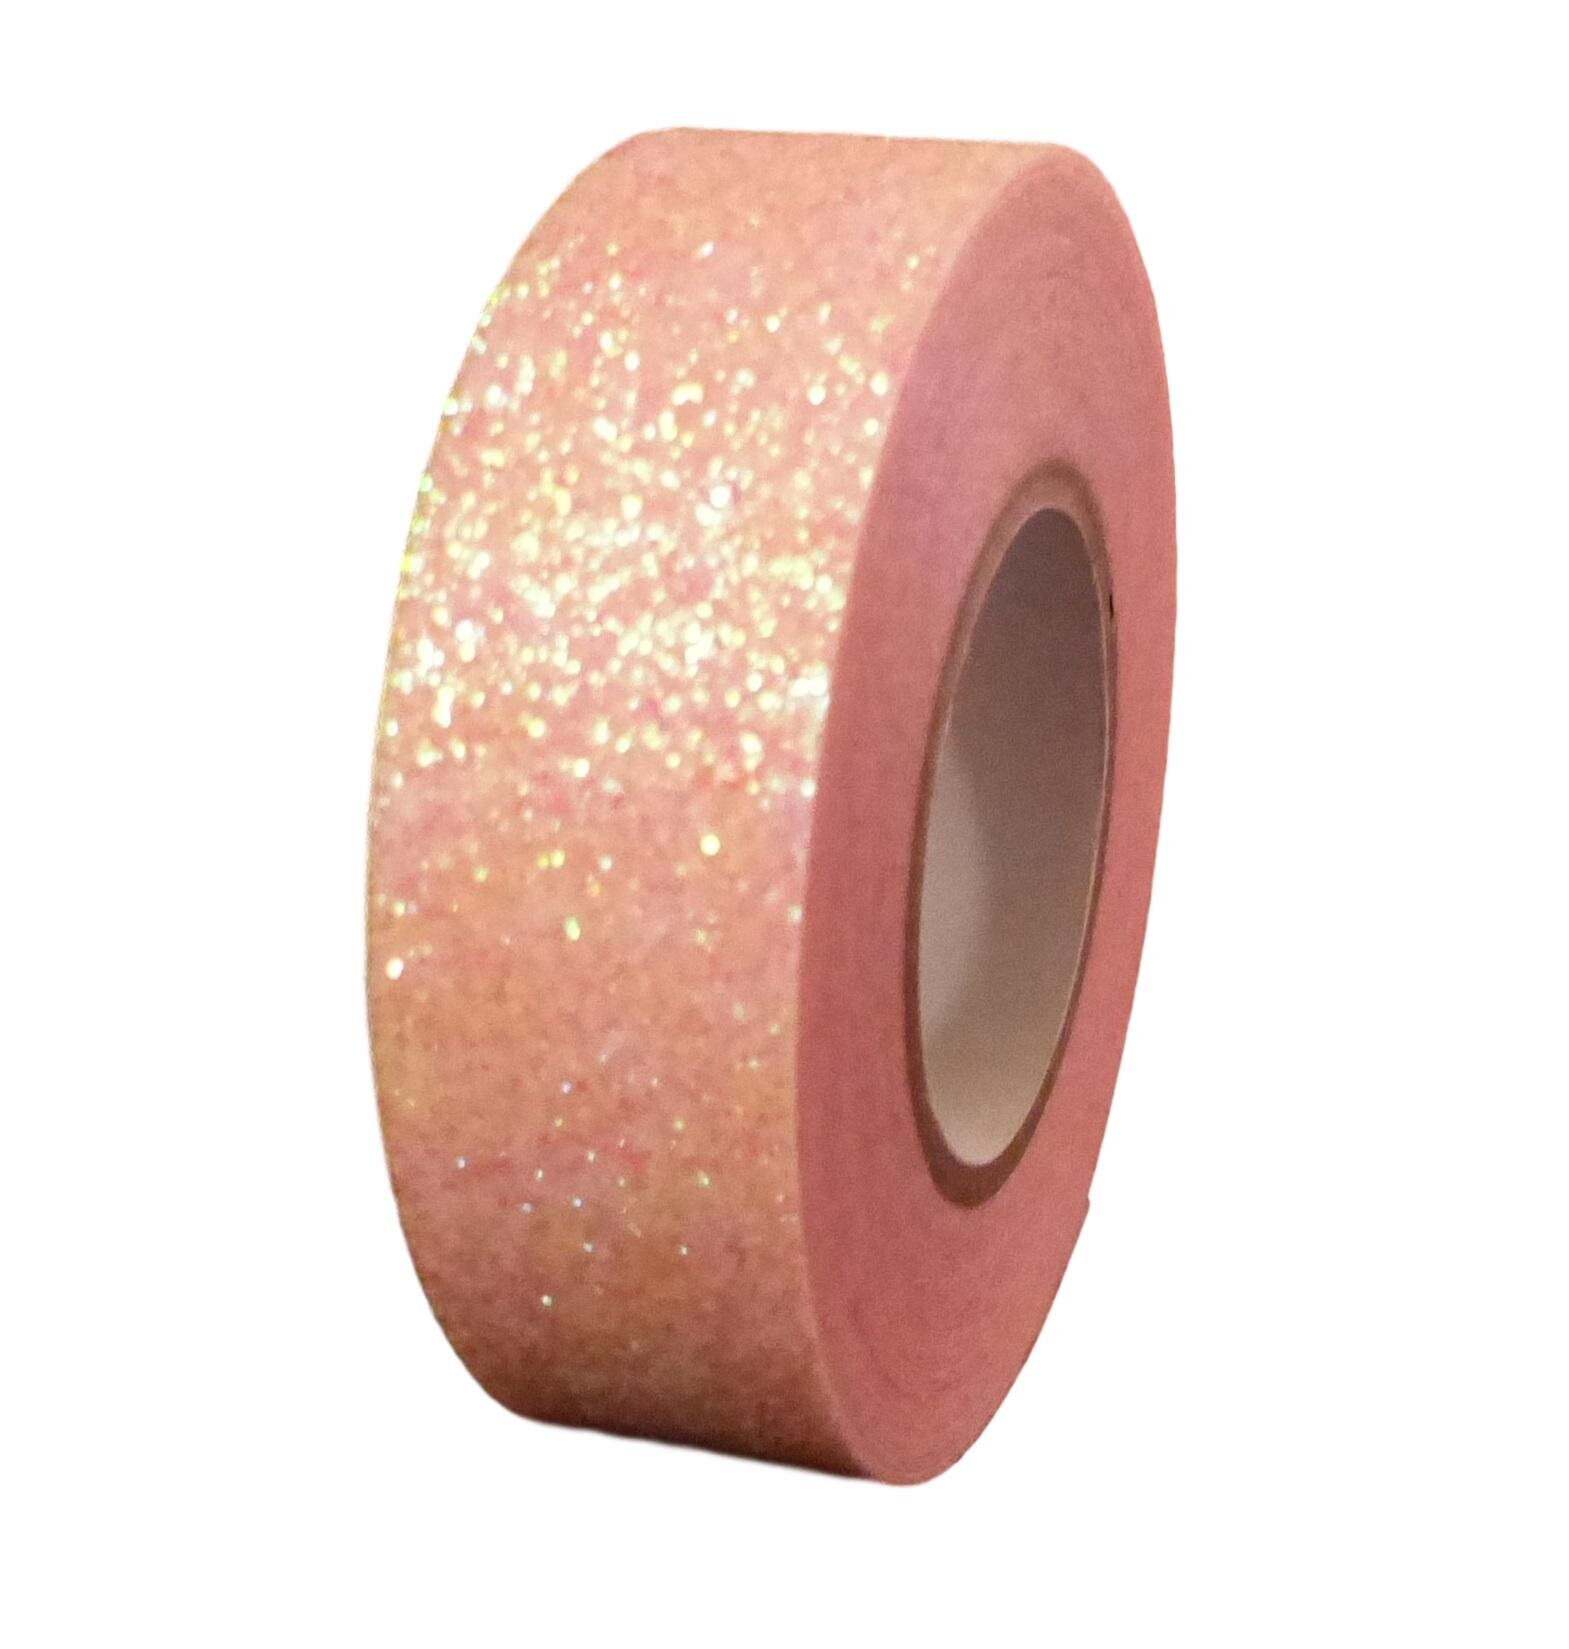 Syntego White with Rose Gold Foil Hearts Washi Tape Decorative Masking Stick on Trim 15mm x 10 Meters